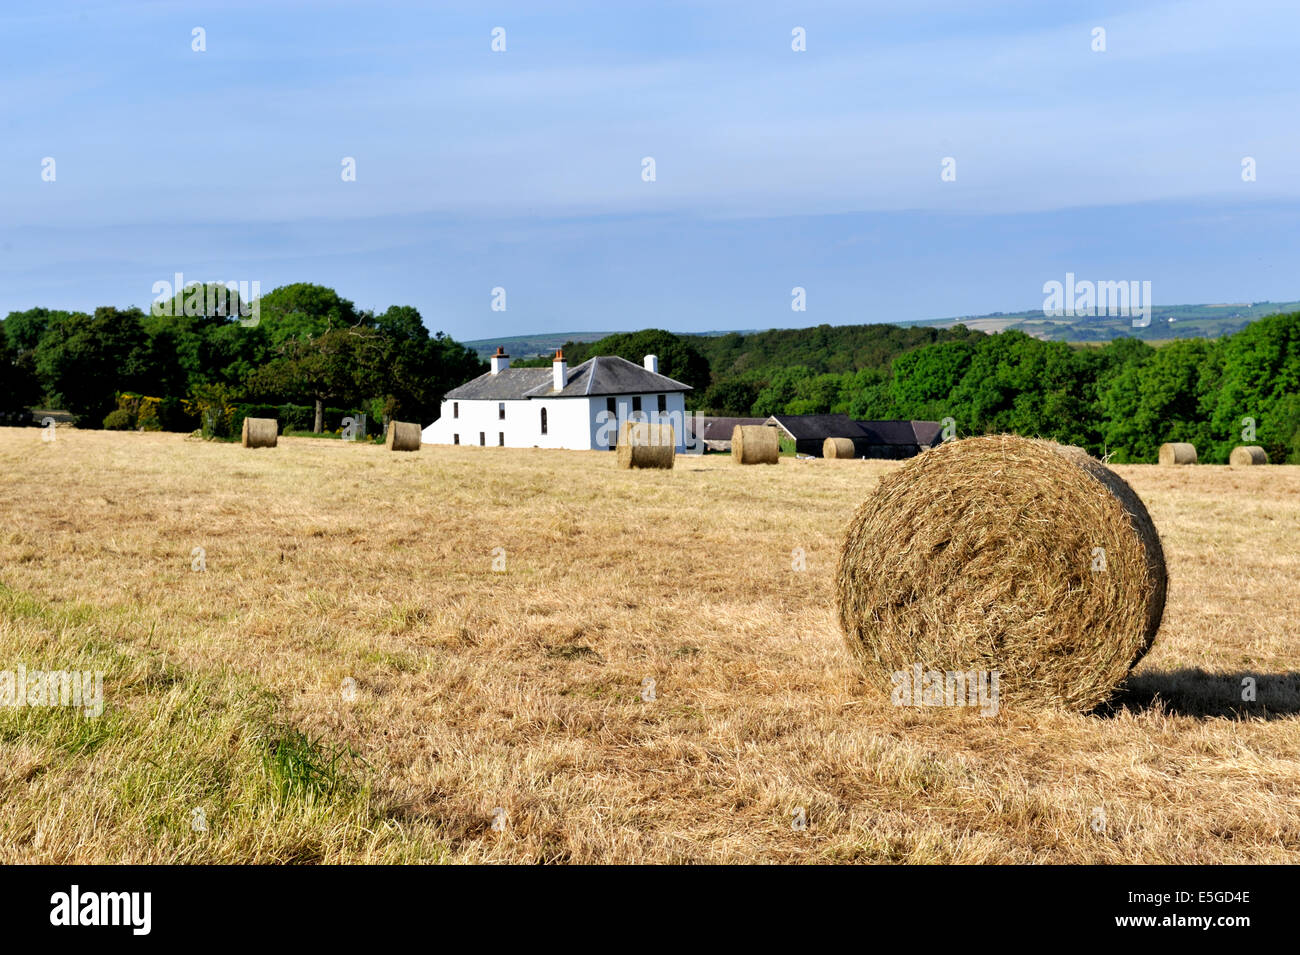 Round hay bales in field near Cardigan, Wales, UK Banque D'Images